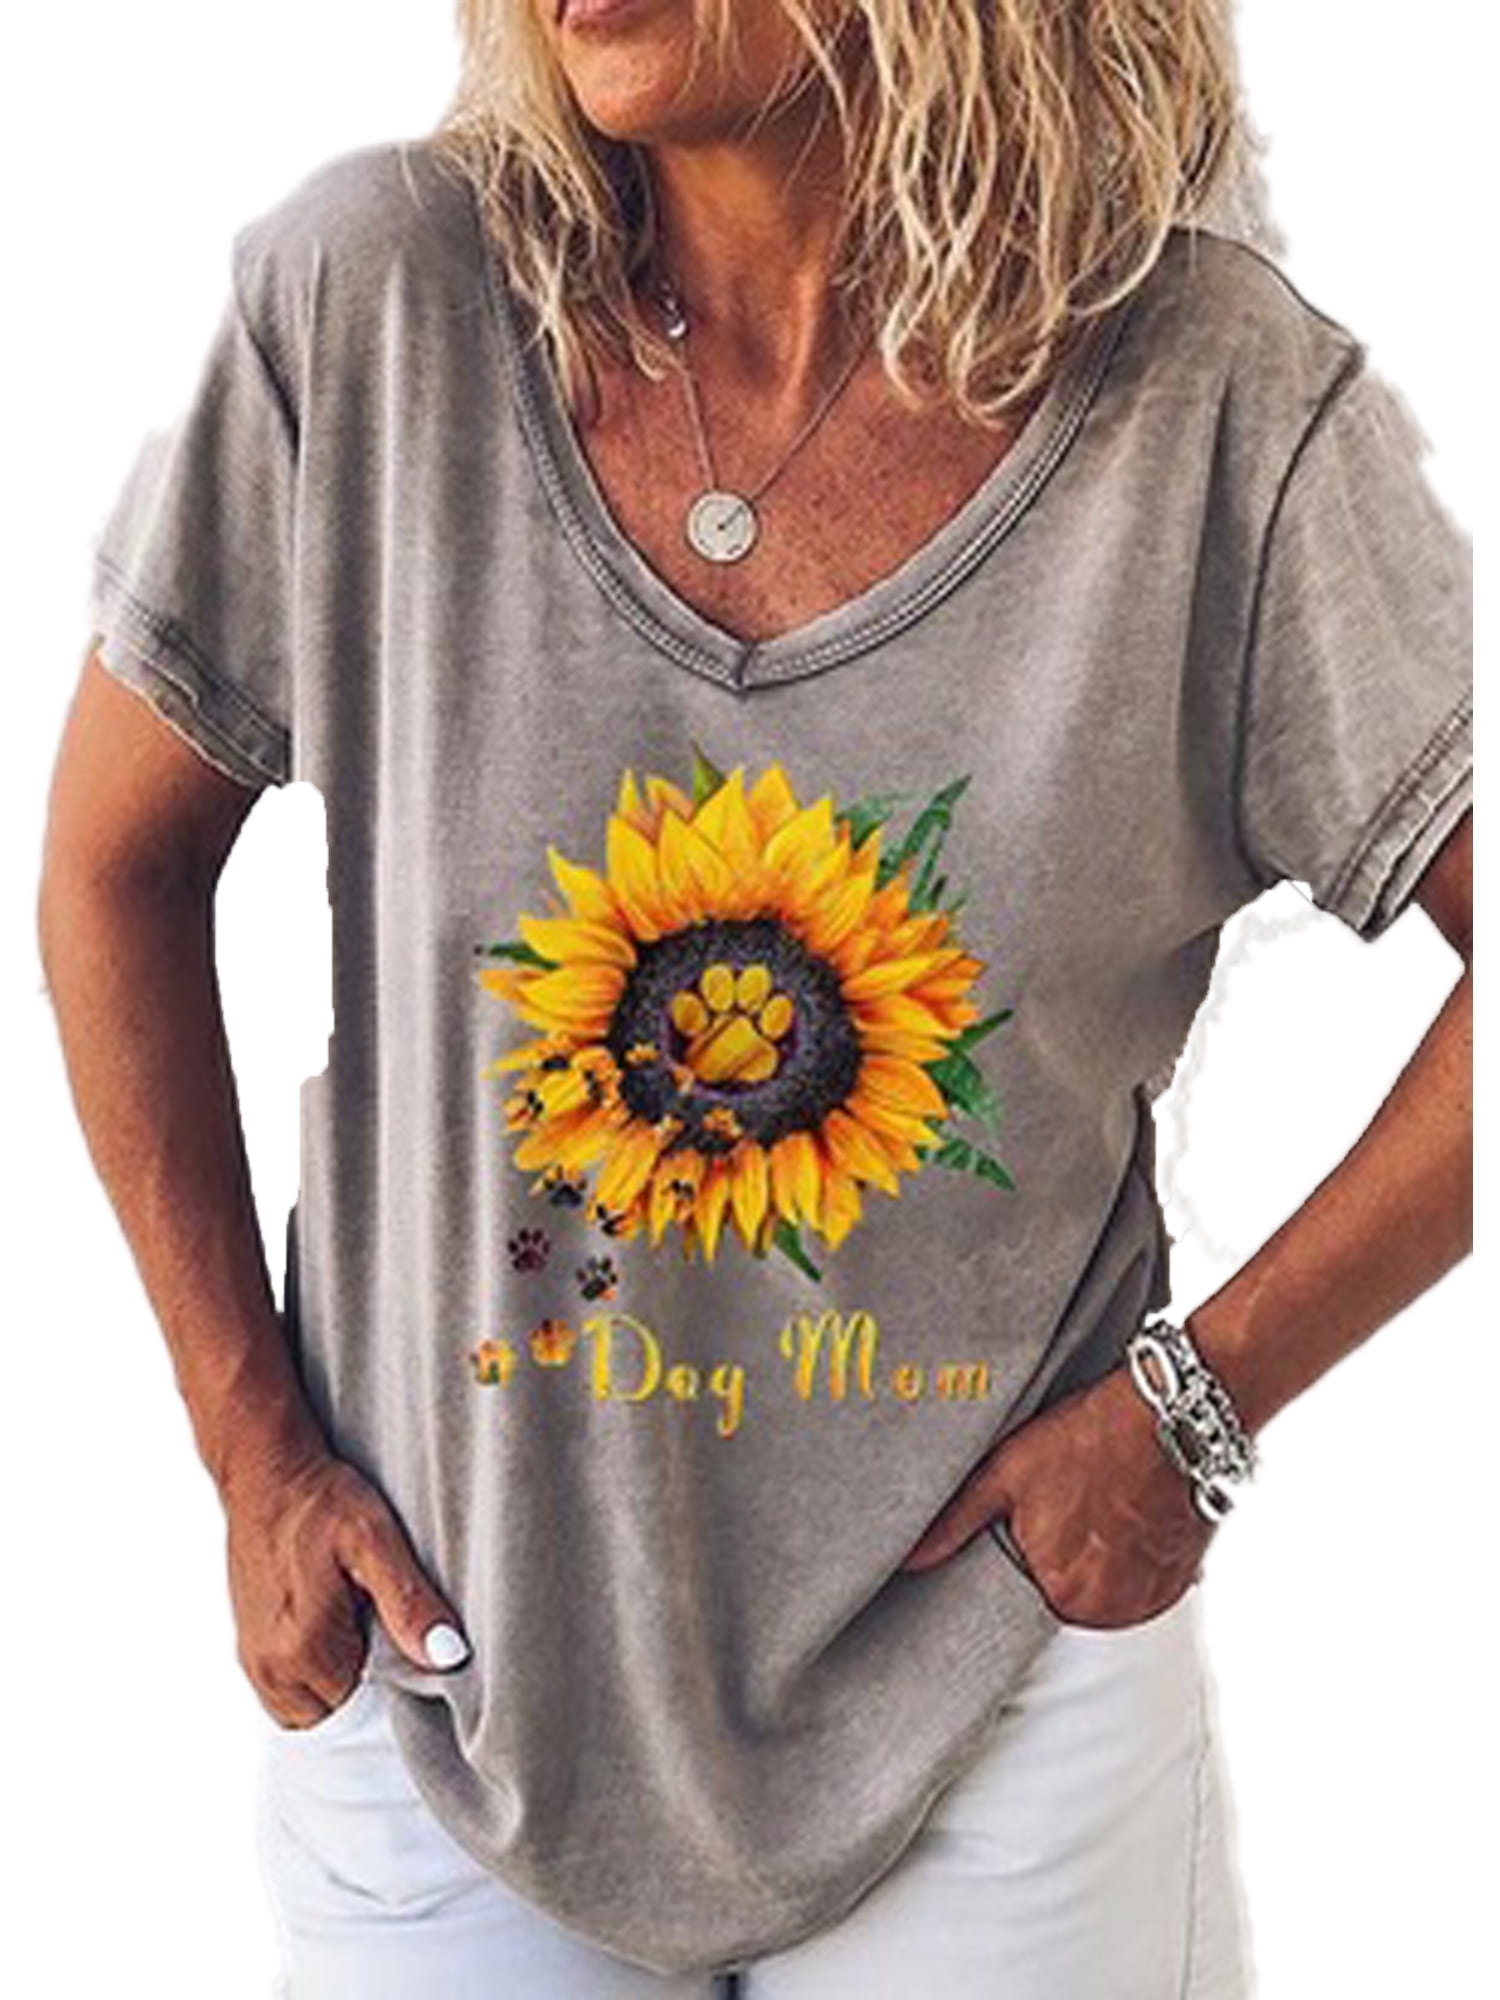 Womens Sunflower T Shirts Summer Vintage Short Sleeve Cotton Graphic Tees Cute Games Printed Tops Lightweight Blouse 